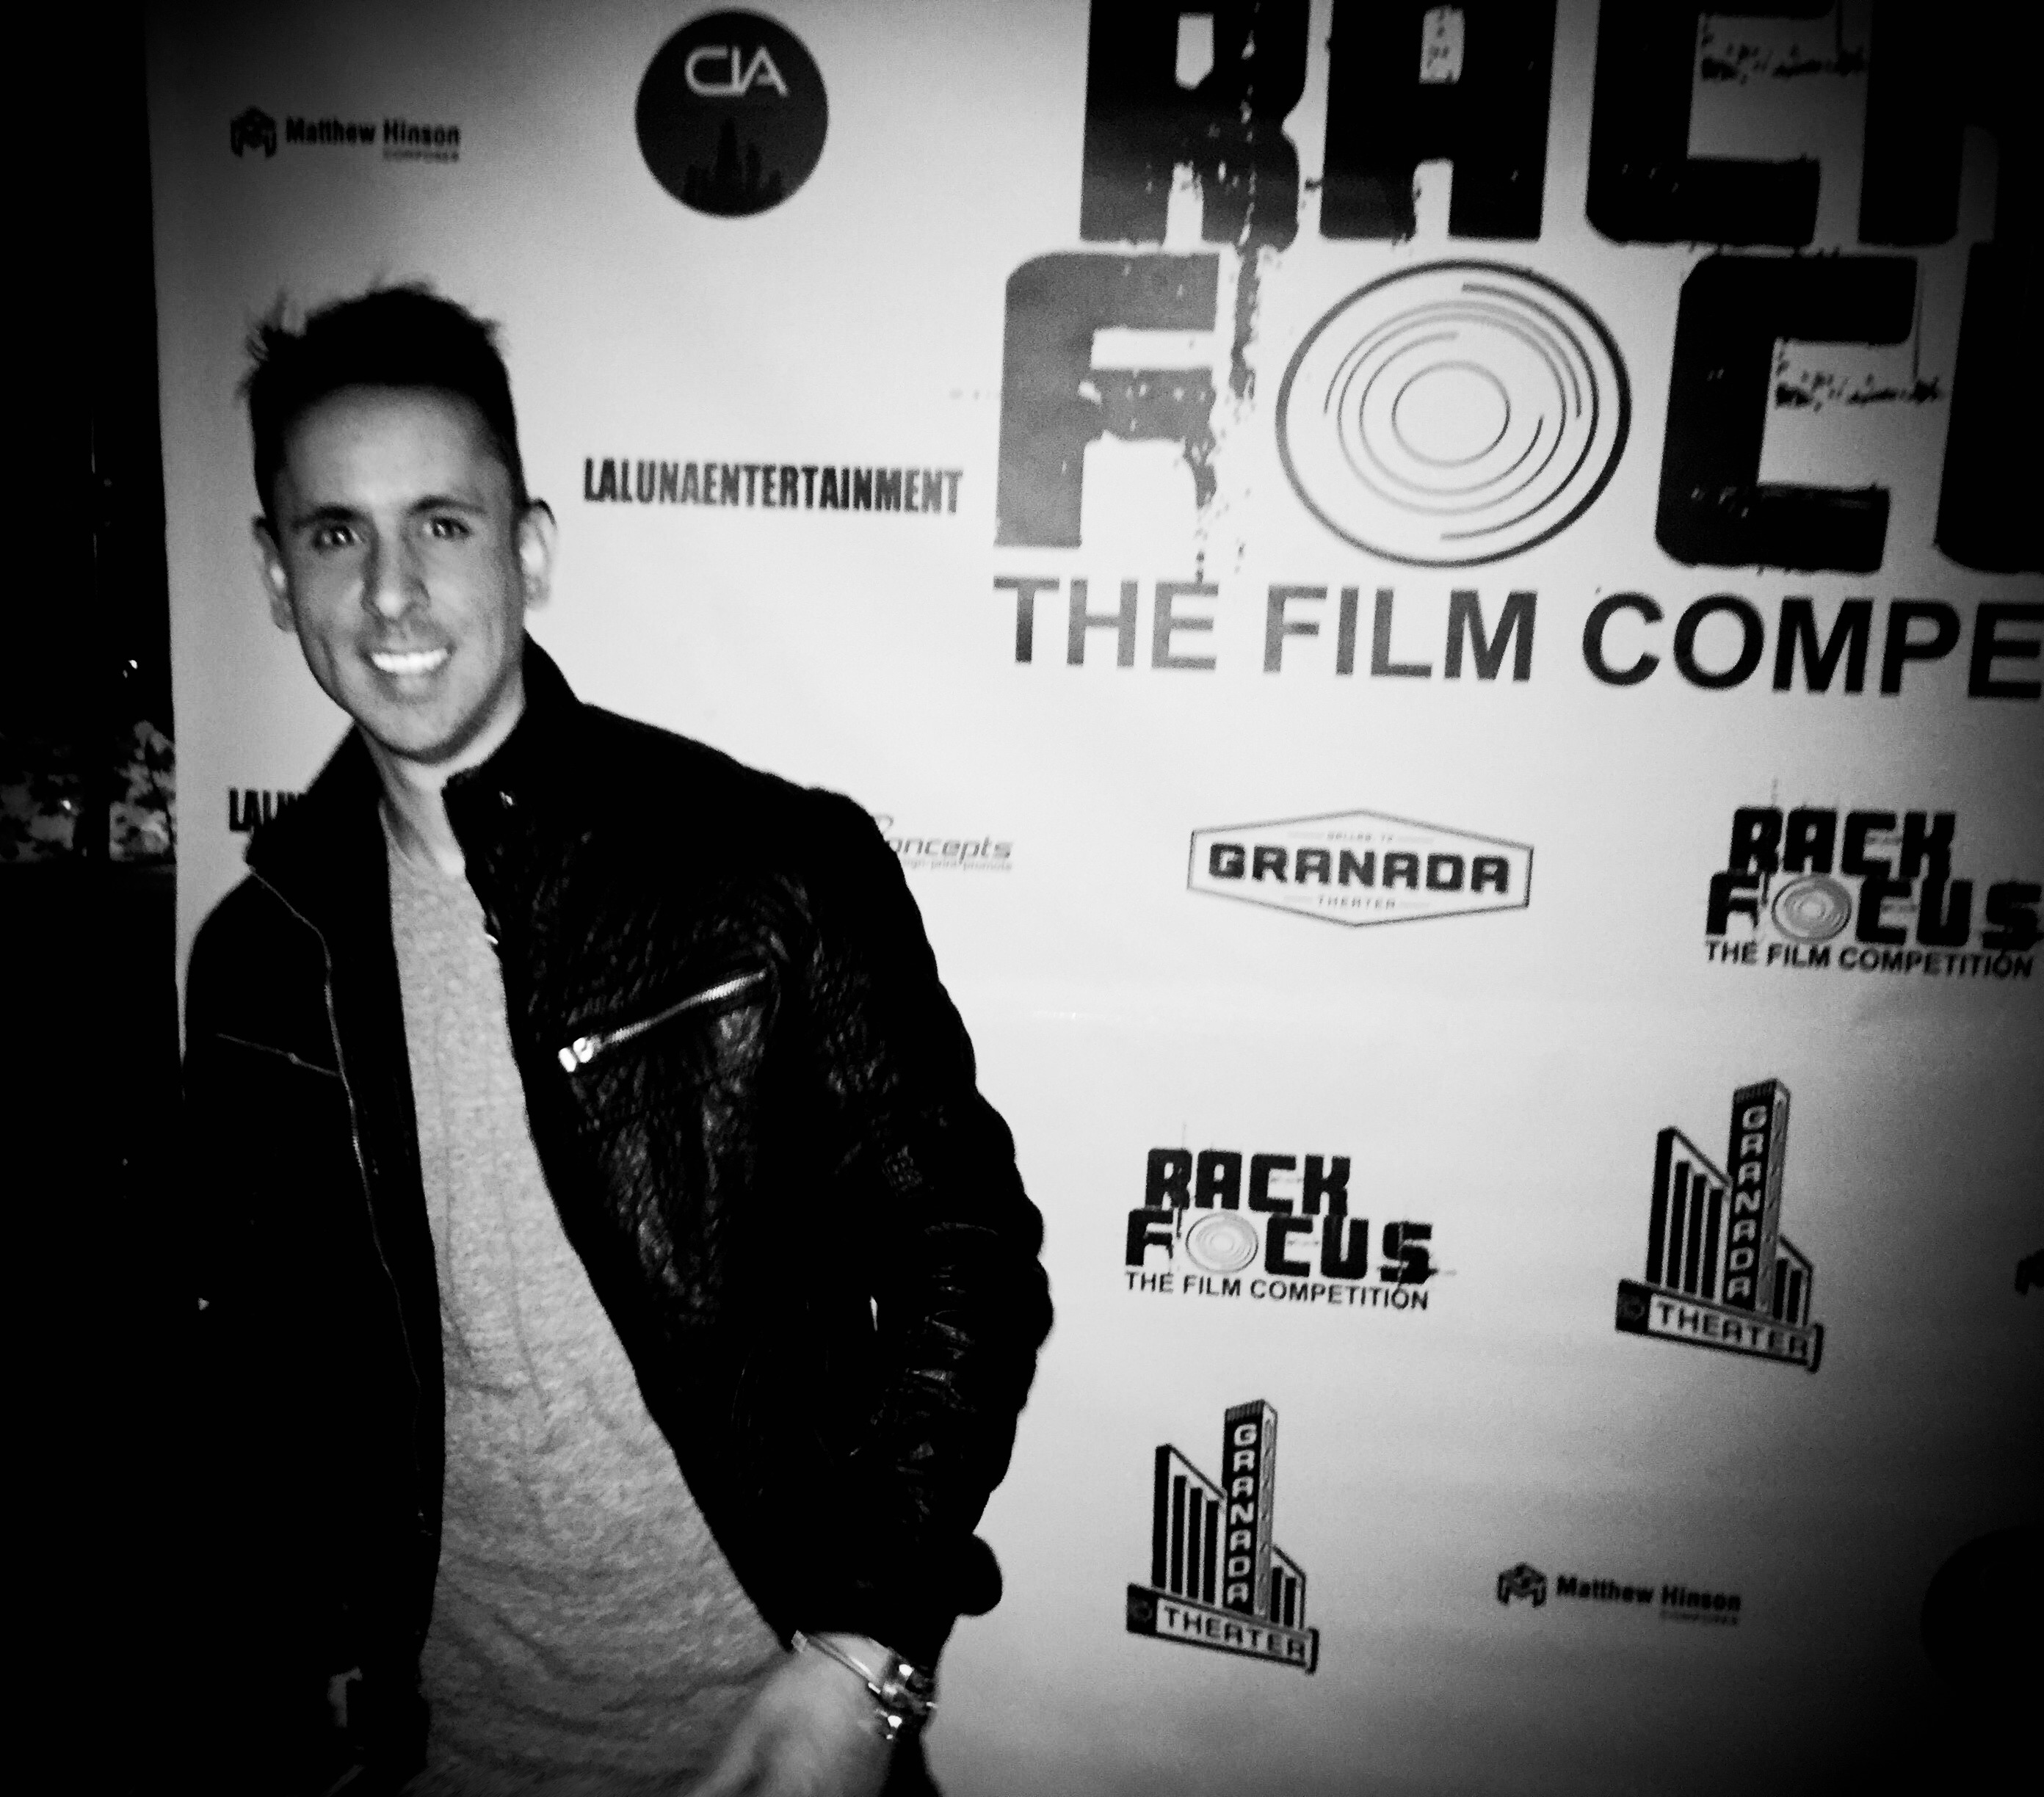 Actor Randy Shoemake in attendance at Dallas's Rack Focus Film Competition Red Carpet premier.